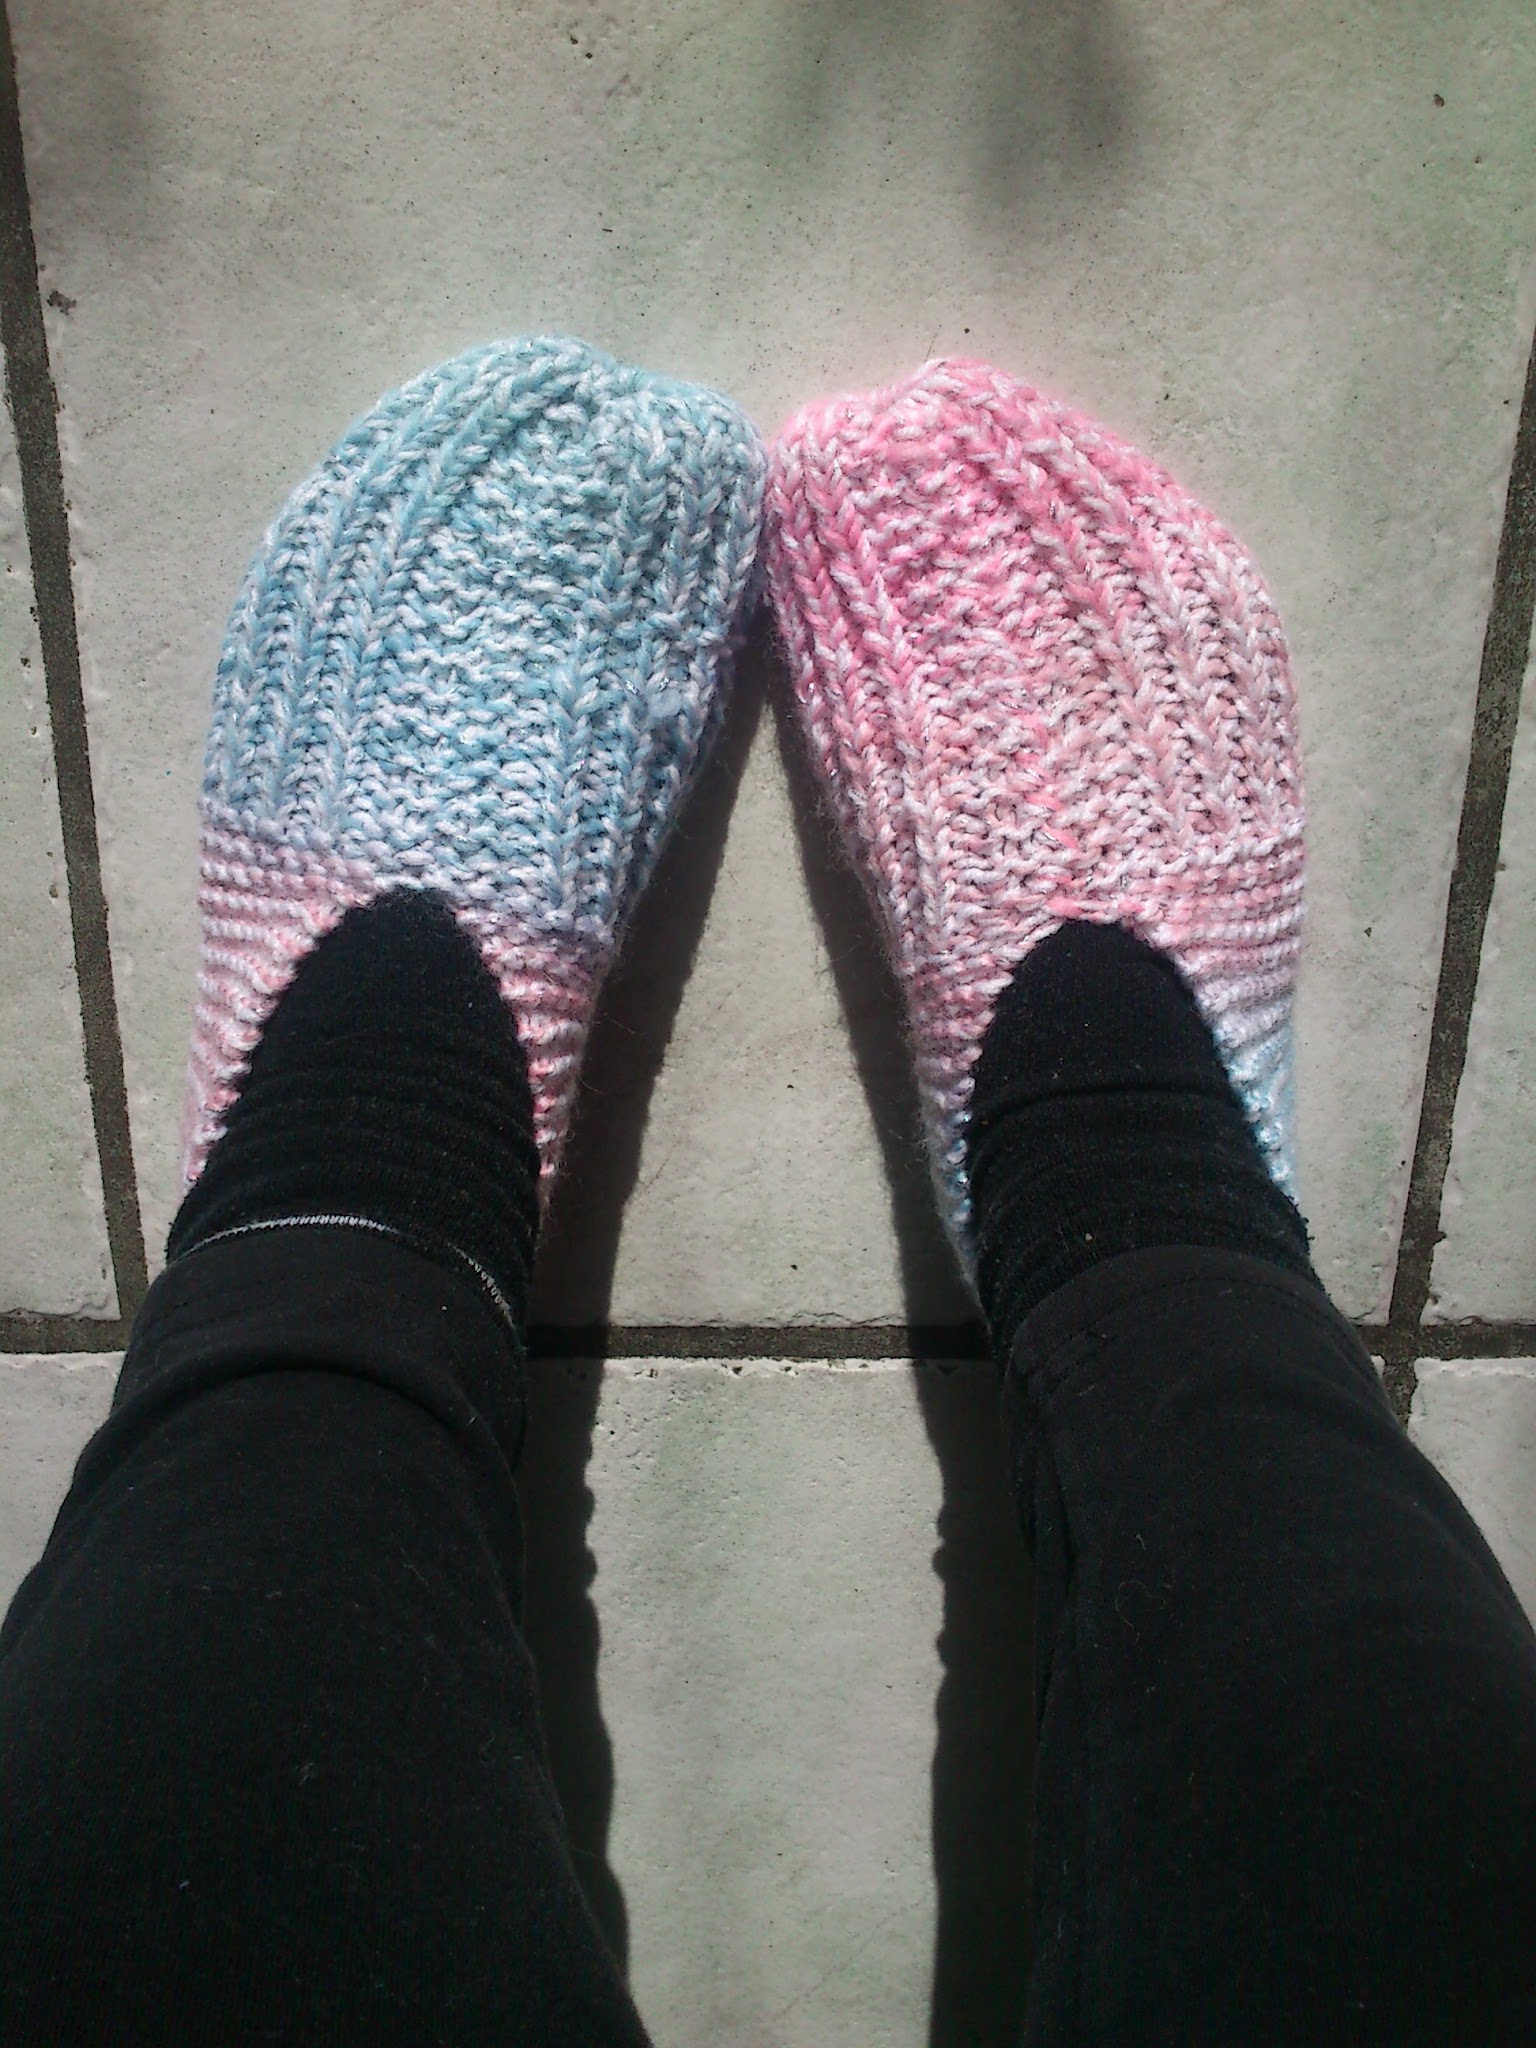 Even more slippers